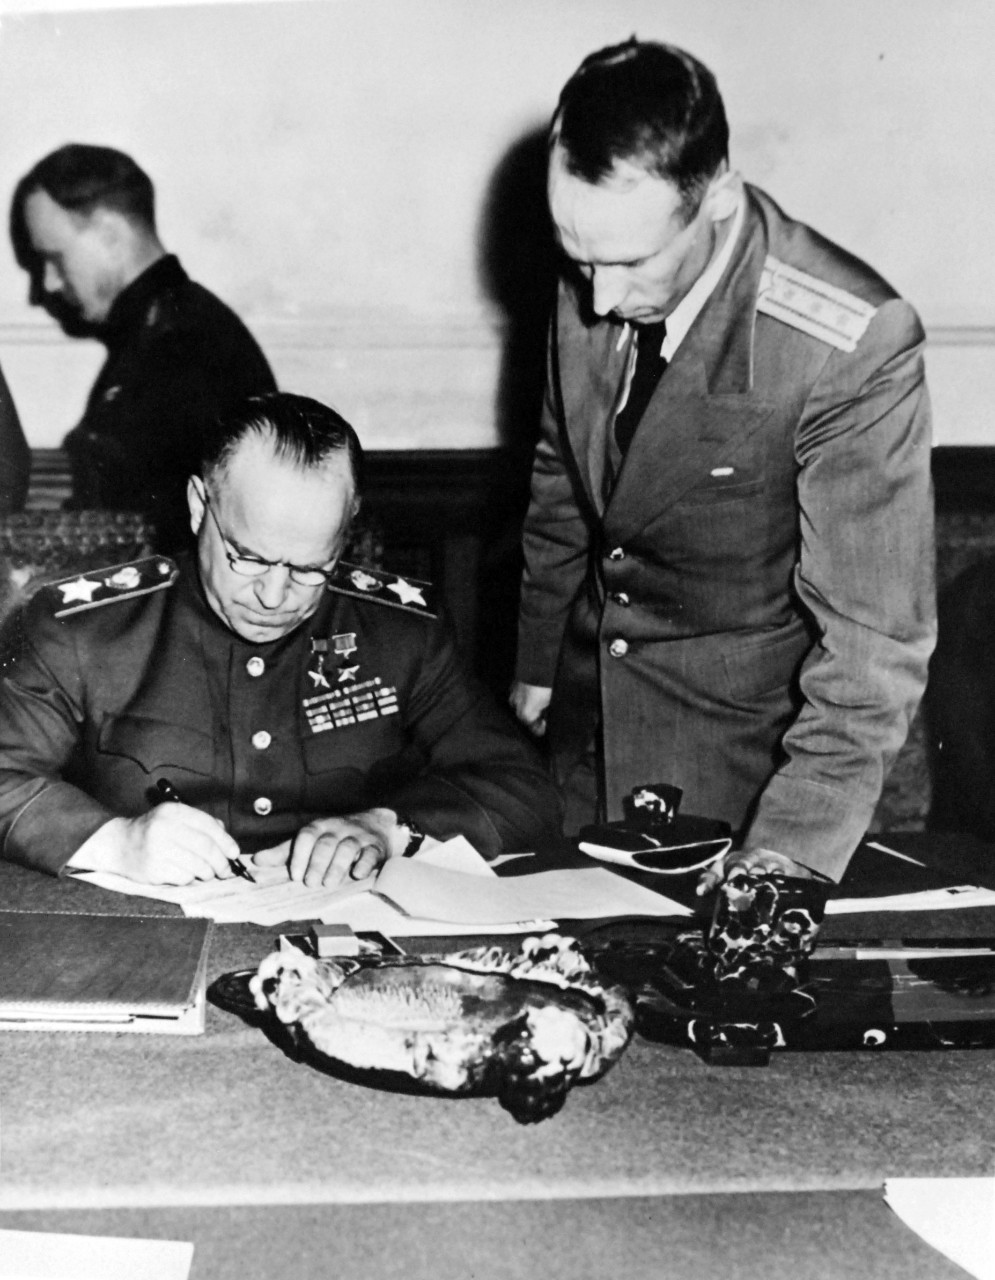 111-SC-27435: Surrender of Germany, 7 May 1945. Field Marshall George K. Zhukov, Deputy Commander in Chief of all Soviet Forces signs the ratified Unconditional Surrender terms as agreed upon at Reims for the Russian Army.  U.S. Army Photograph. Courtesy of the Library of Congress Collection, Lot-8988. (2015/10/16).